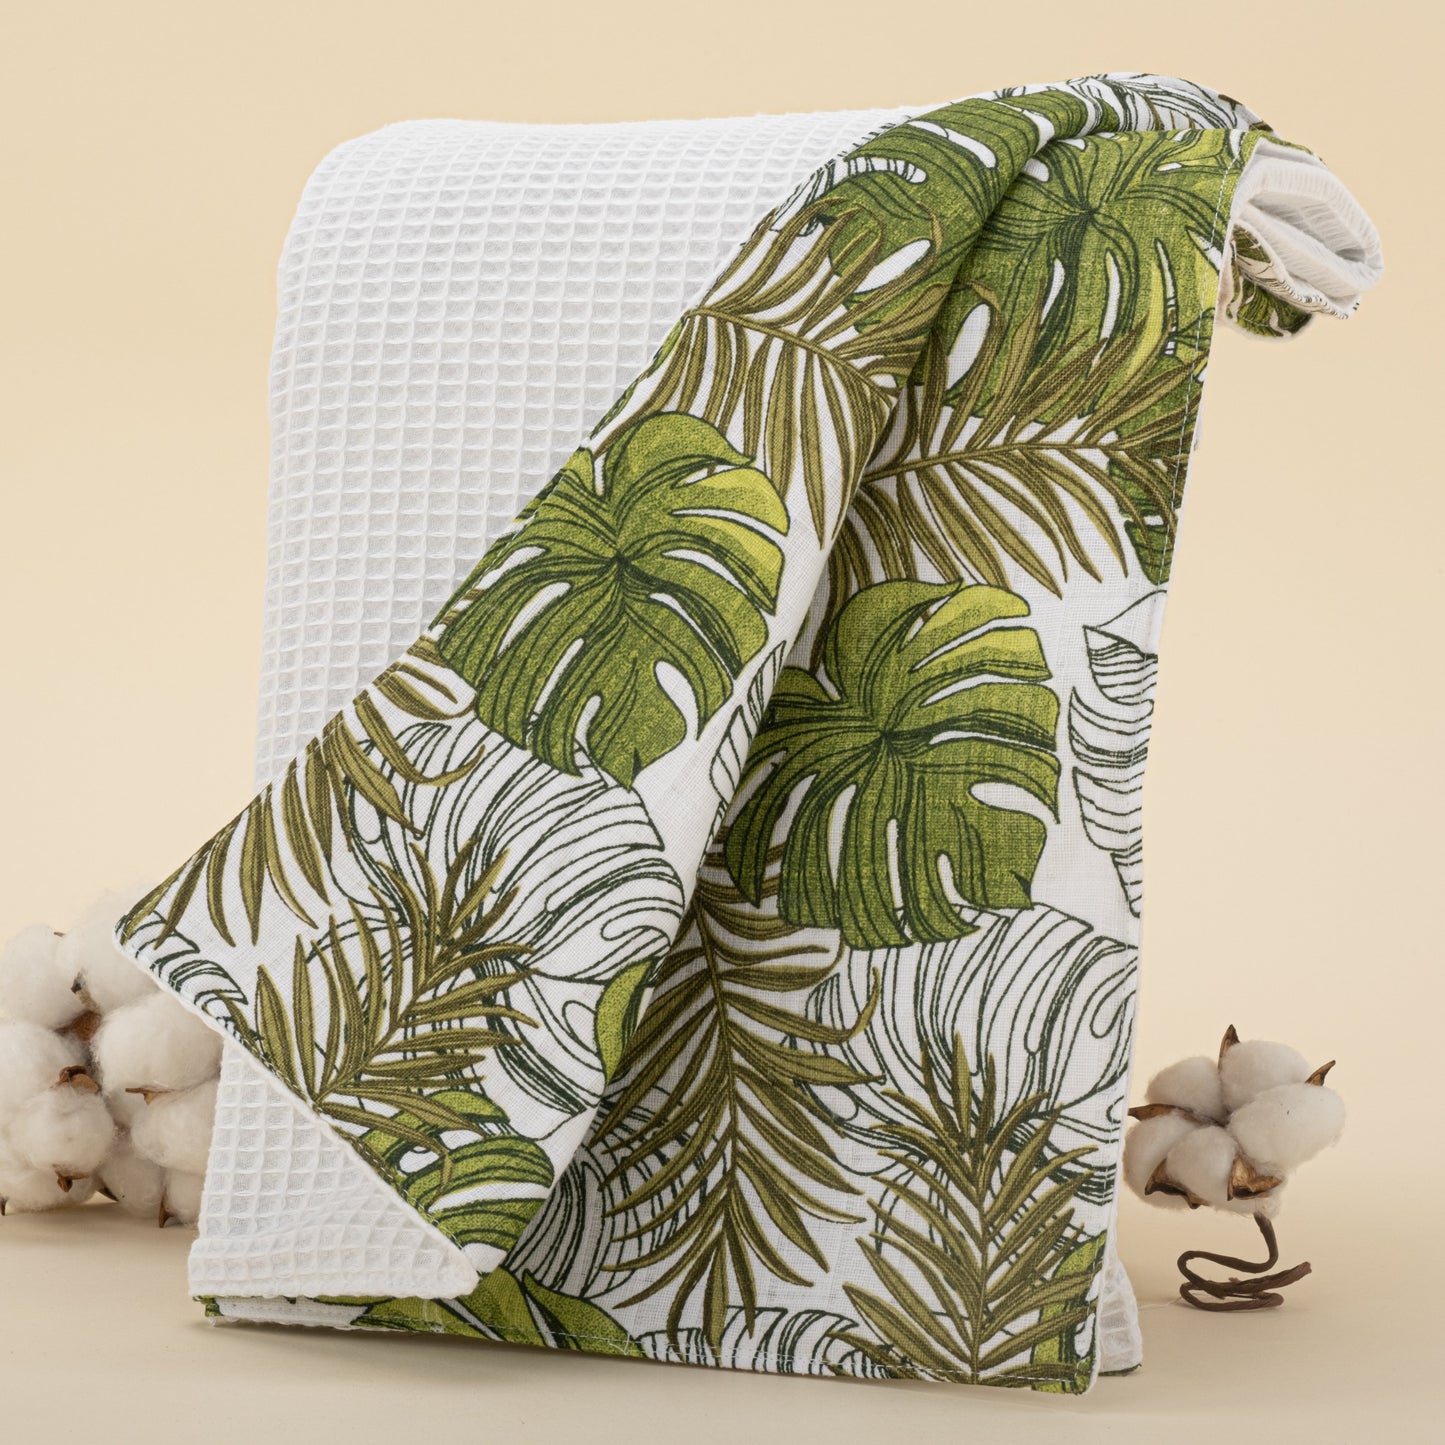 Pique Blanket - Double Side - White Honeycomb - Palm Leaves